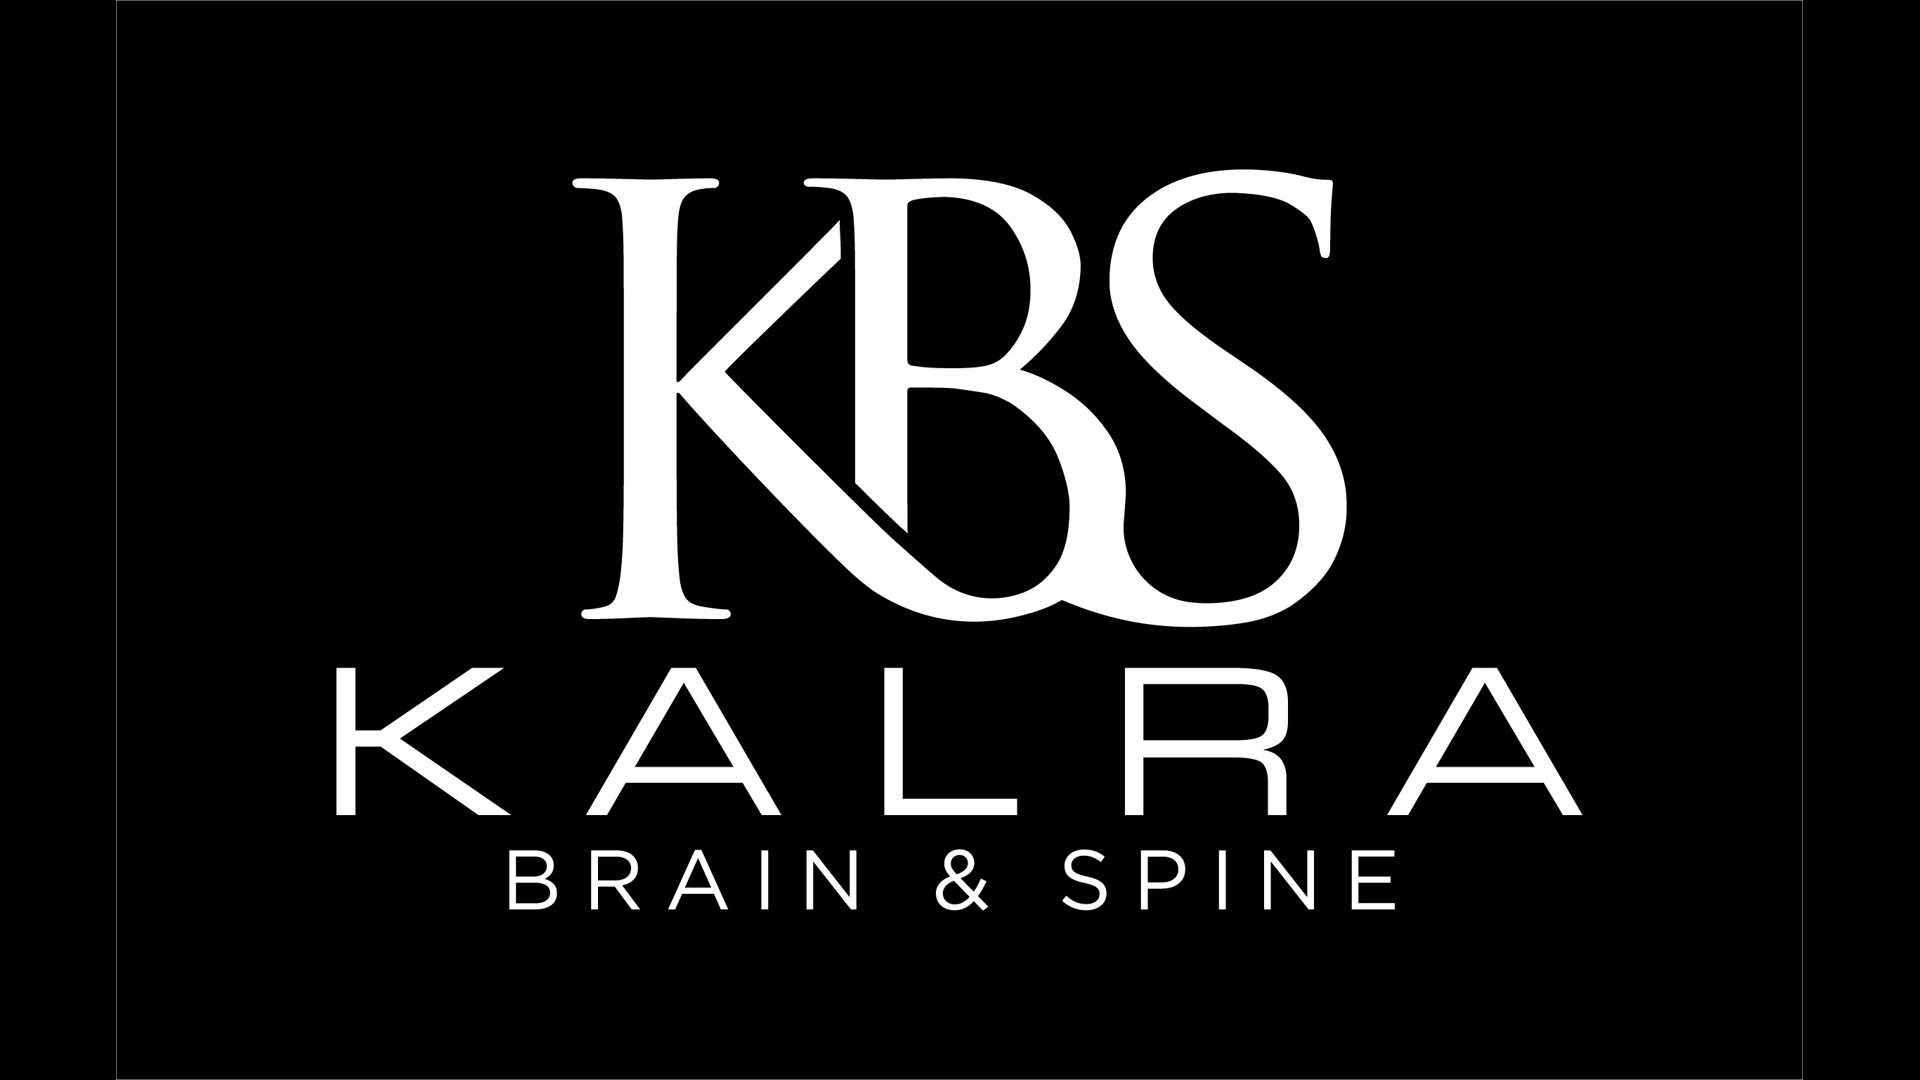 Kalra Brain & Spine is located in Frisco. 
Call (972) 905-9226 for more information or go to www.KalraSurgery.com.